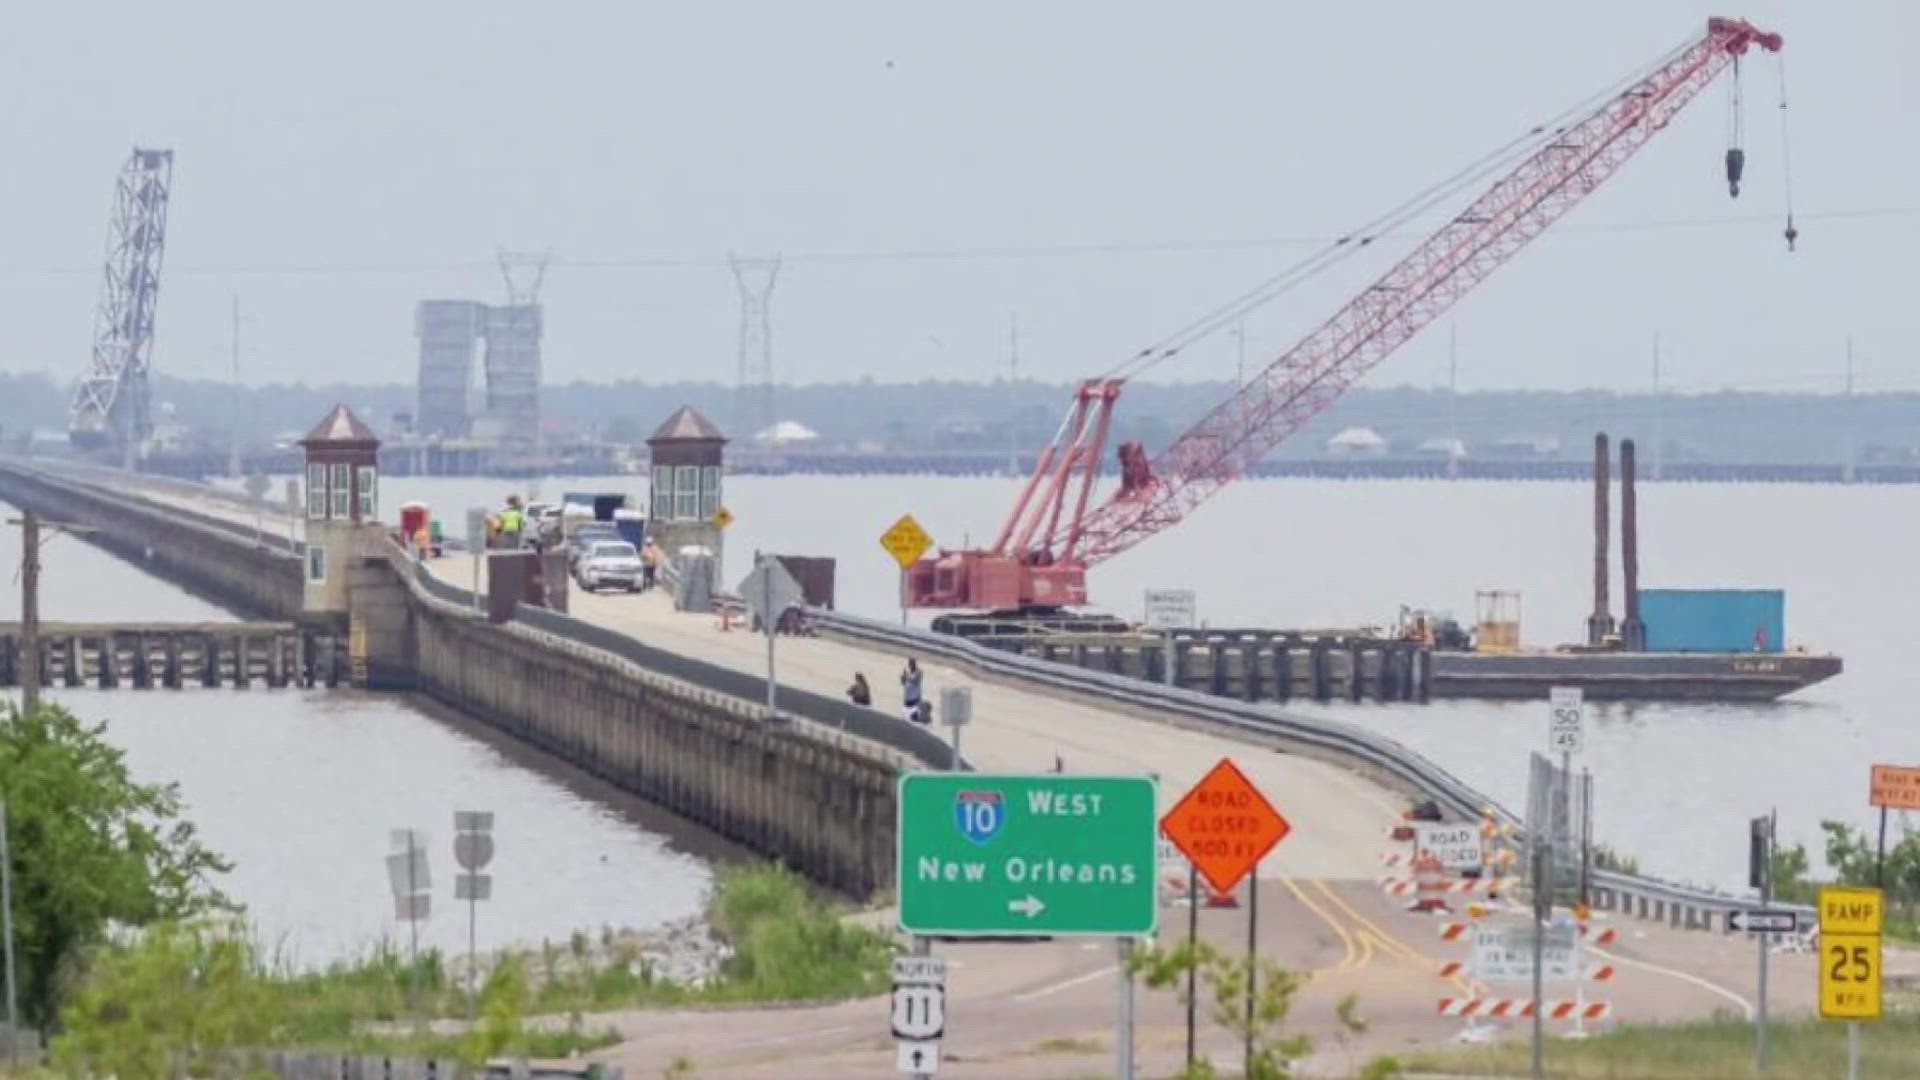 The Highway 11 Bridge has been shut down for so long that many have gotten used to taking roundabout ways, but they could soon get some relief.